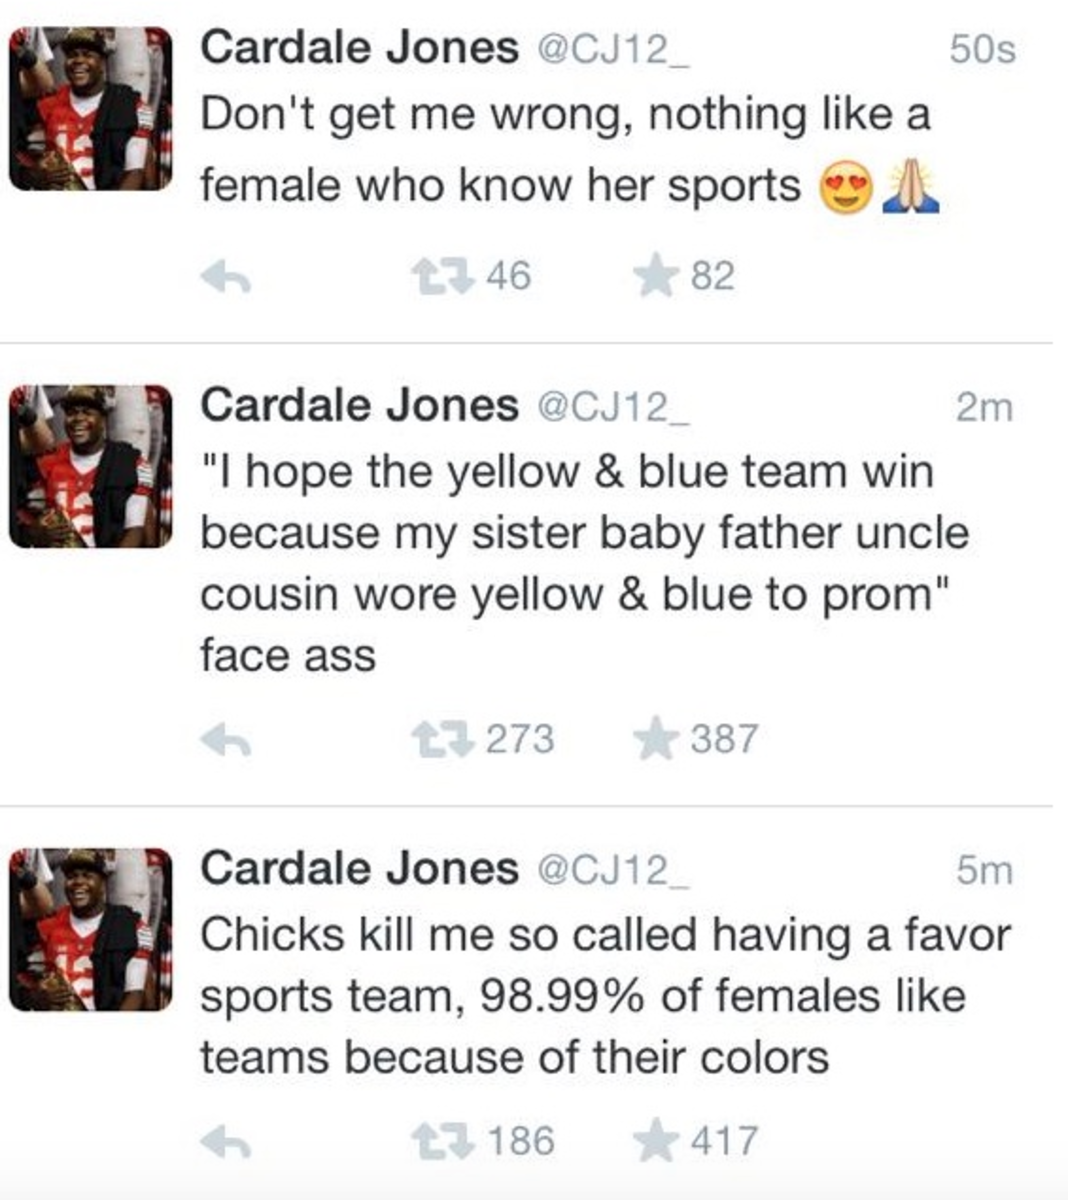 Cardale Jones posts seeral tweets about women and sports.